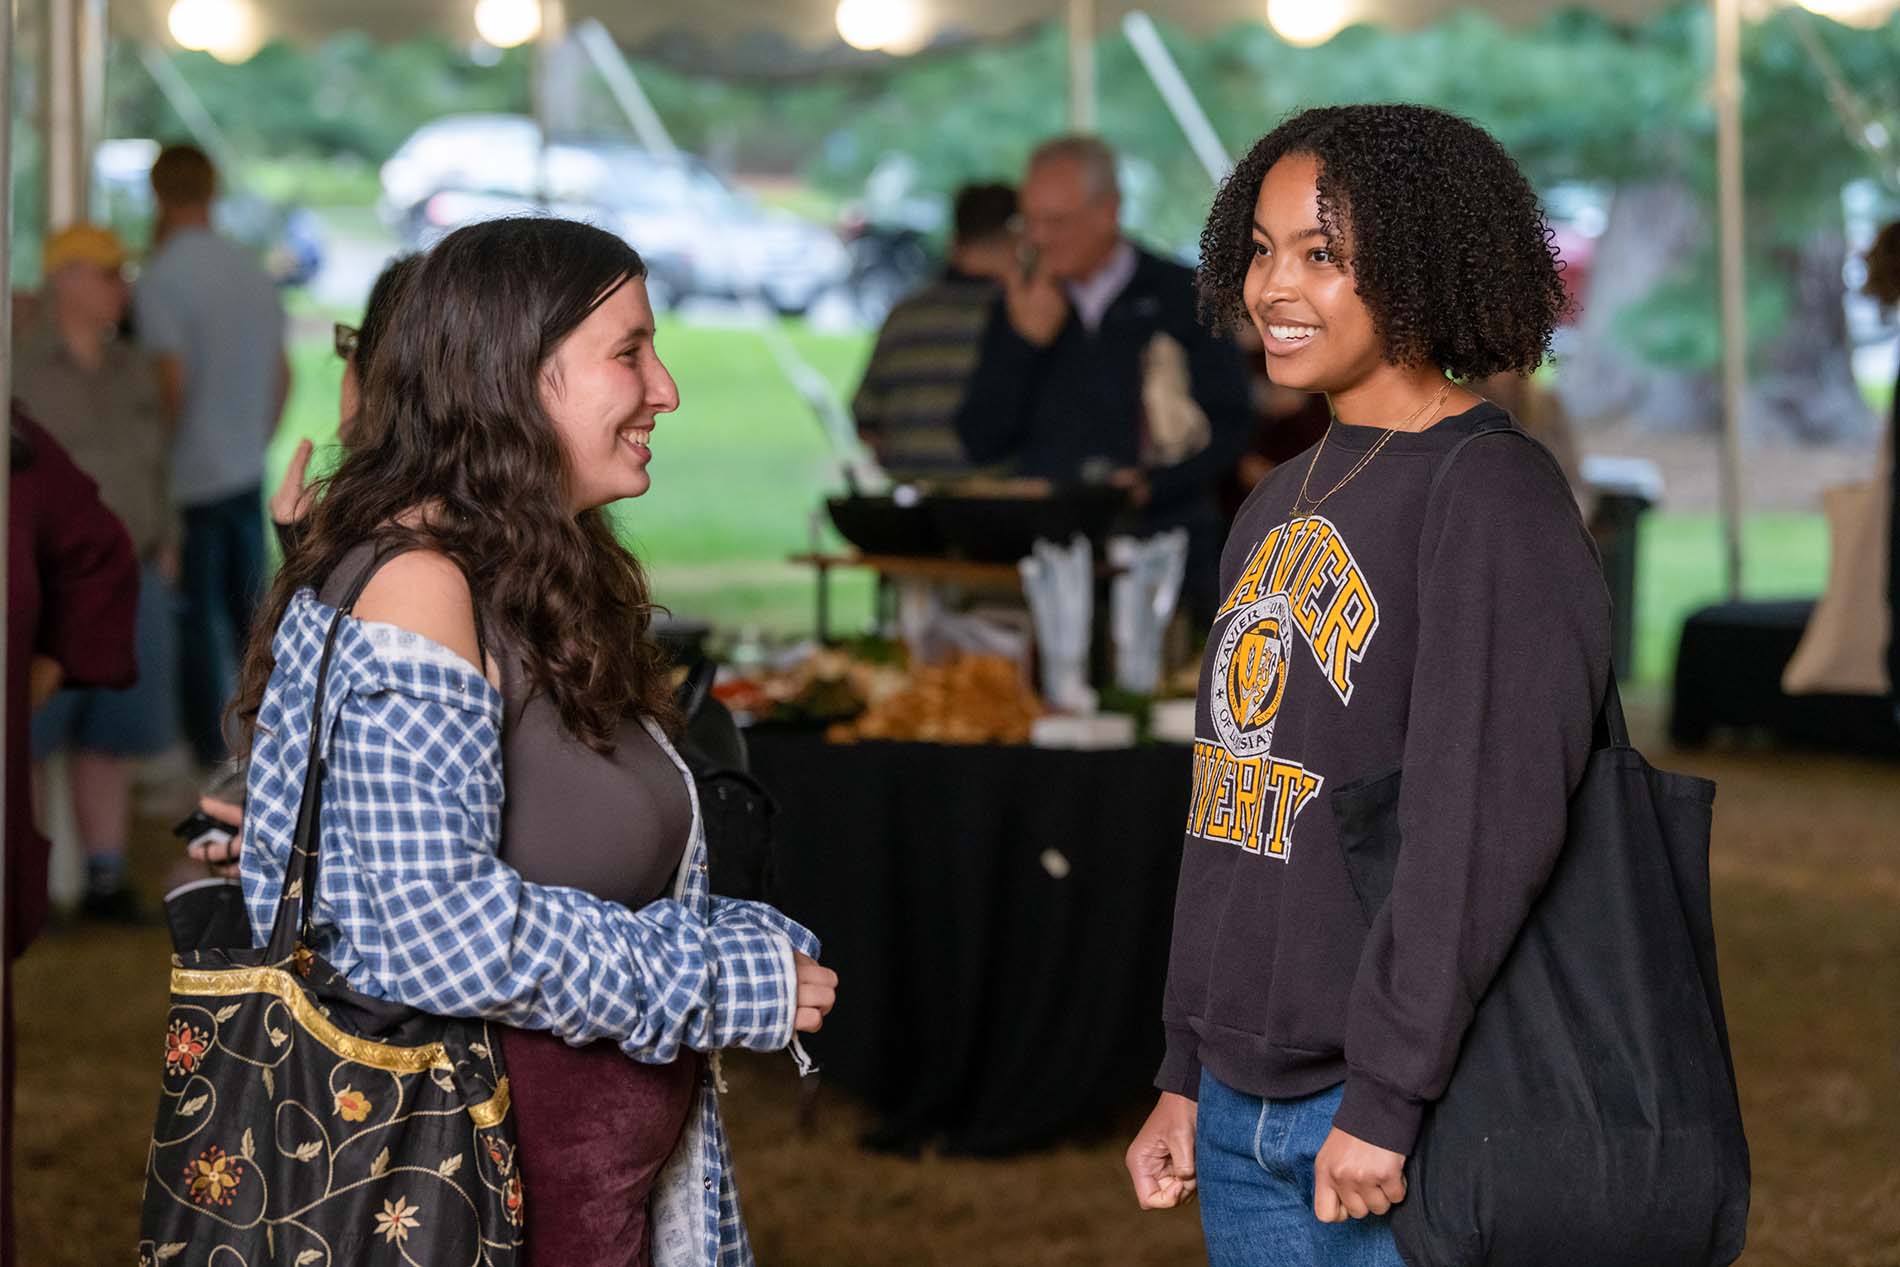 A photo of the opening reception for the weekend. Two people talk to each other while standing under a large event tent, face to face. The person on the left has long, straight, brown hair, a blue checkered shirt, and a flower-patterned bag. The person on the right has black, shoulder-length, curly hair, a brown sweater with an athletic logo on it, and a black shoulderbag. Blurred figures are visible in the background.